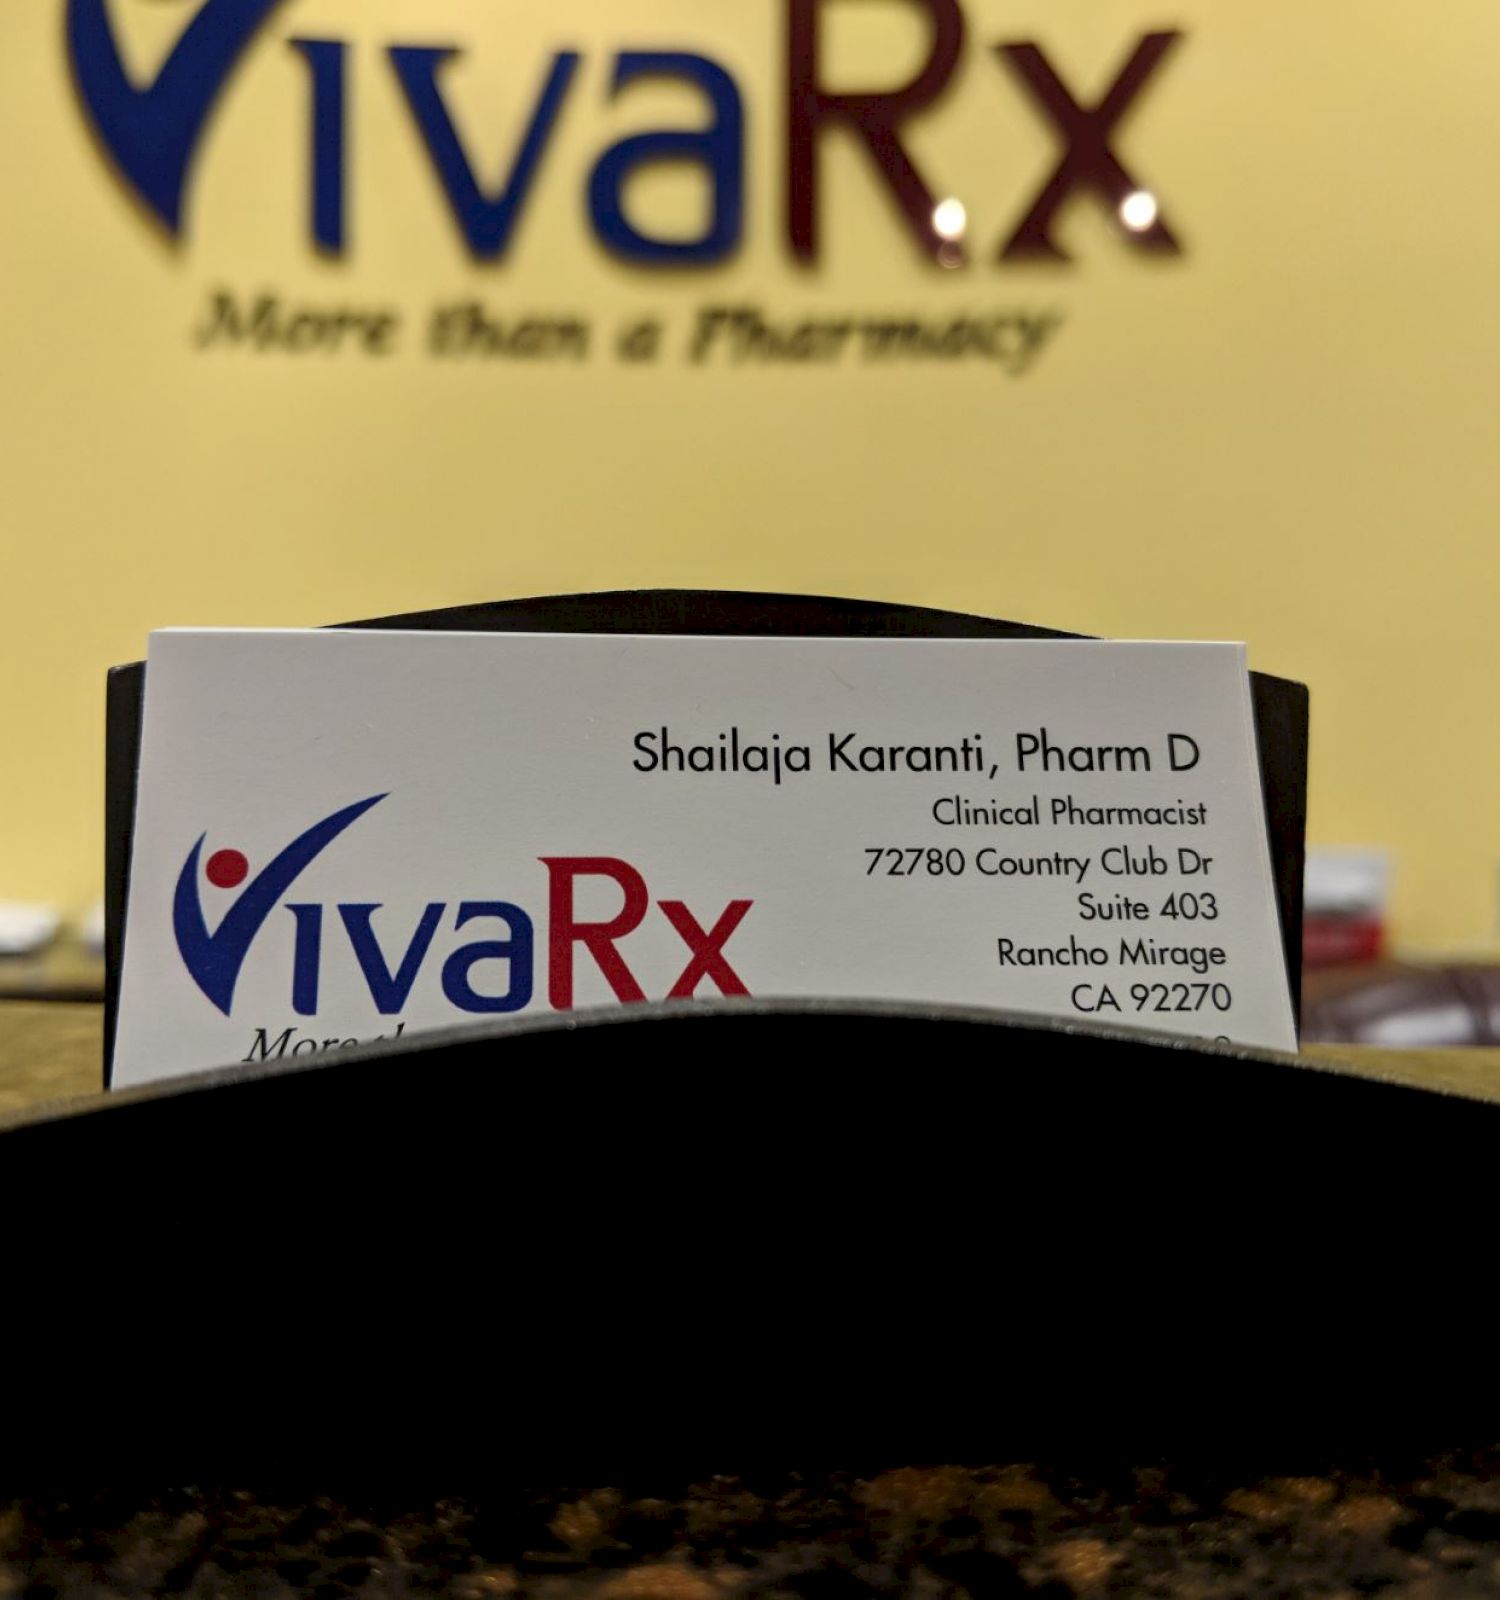 The image shows a business card holder with a card for VivaRx, displaying contact information for a clinical pharmacist. The background shows the VivaRx sign.